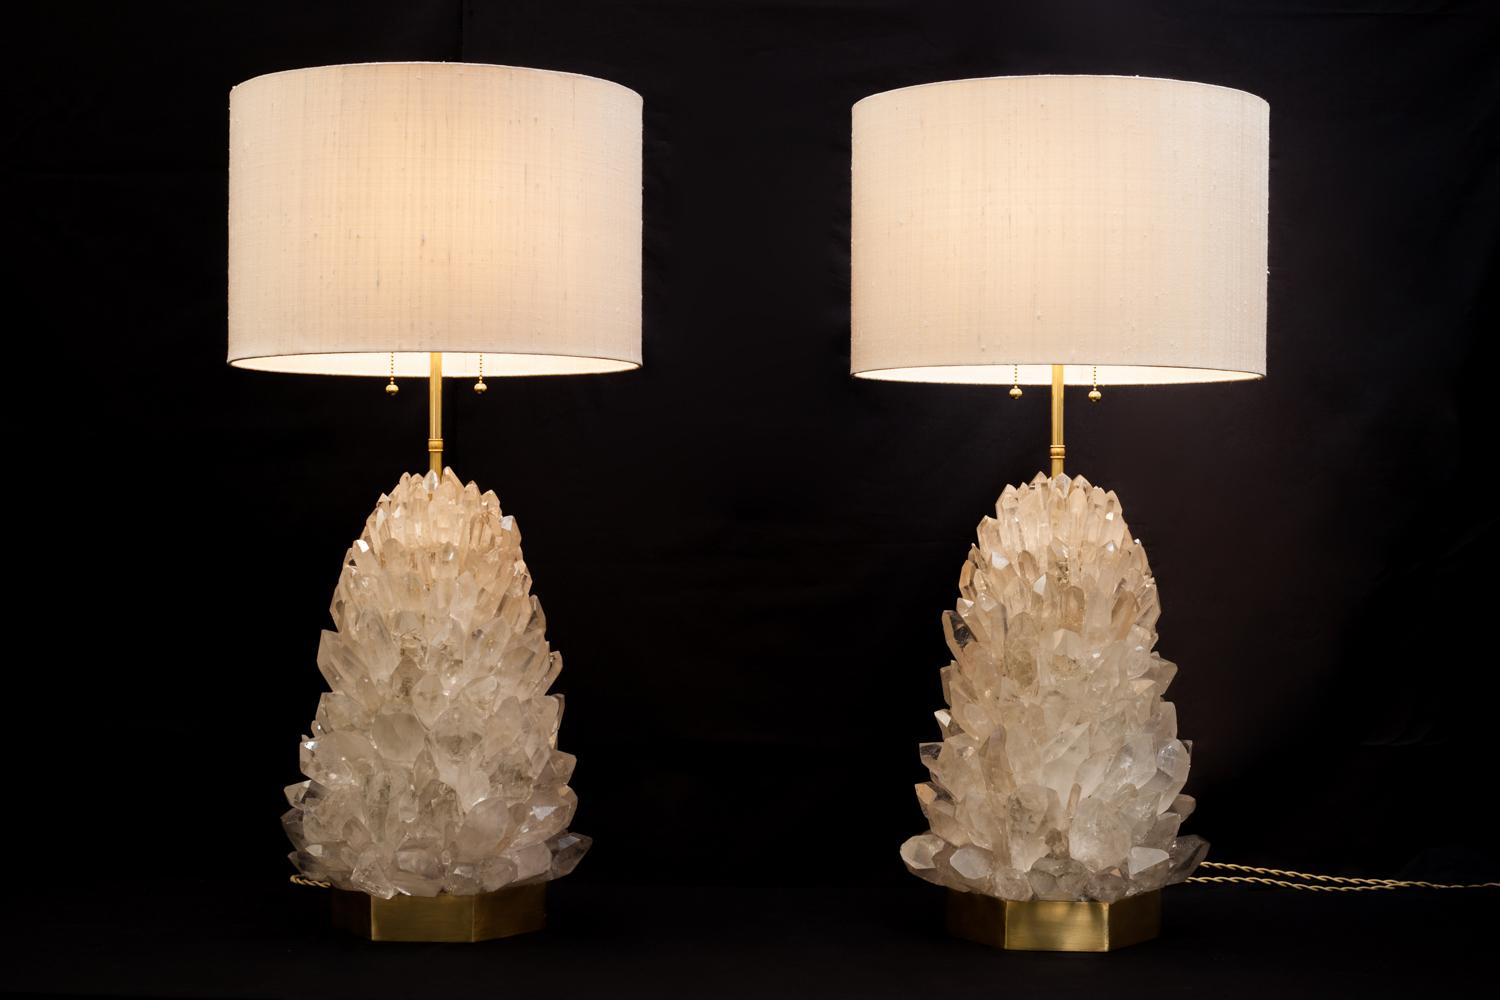 Organic Modern Pair of Natural Crystal Table Lamps, Signed by Demian Quincke